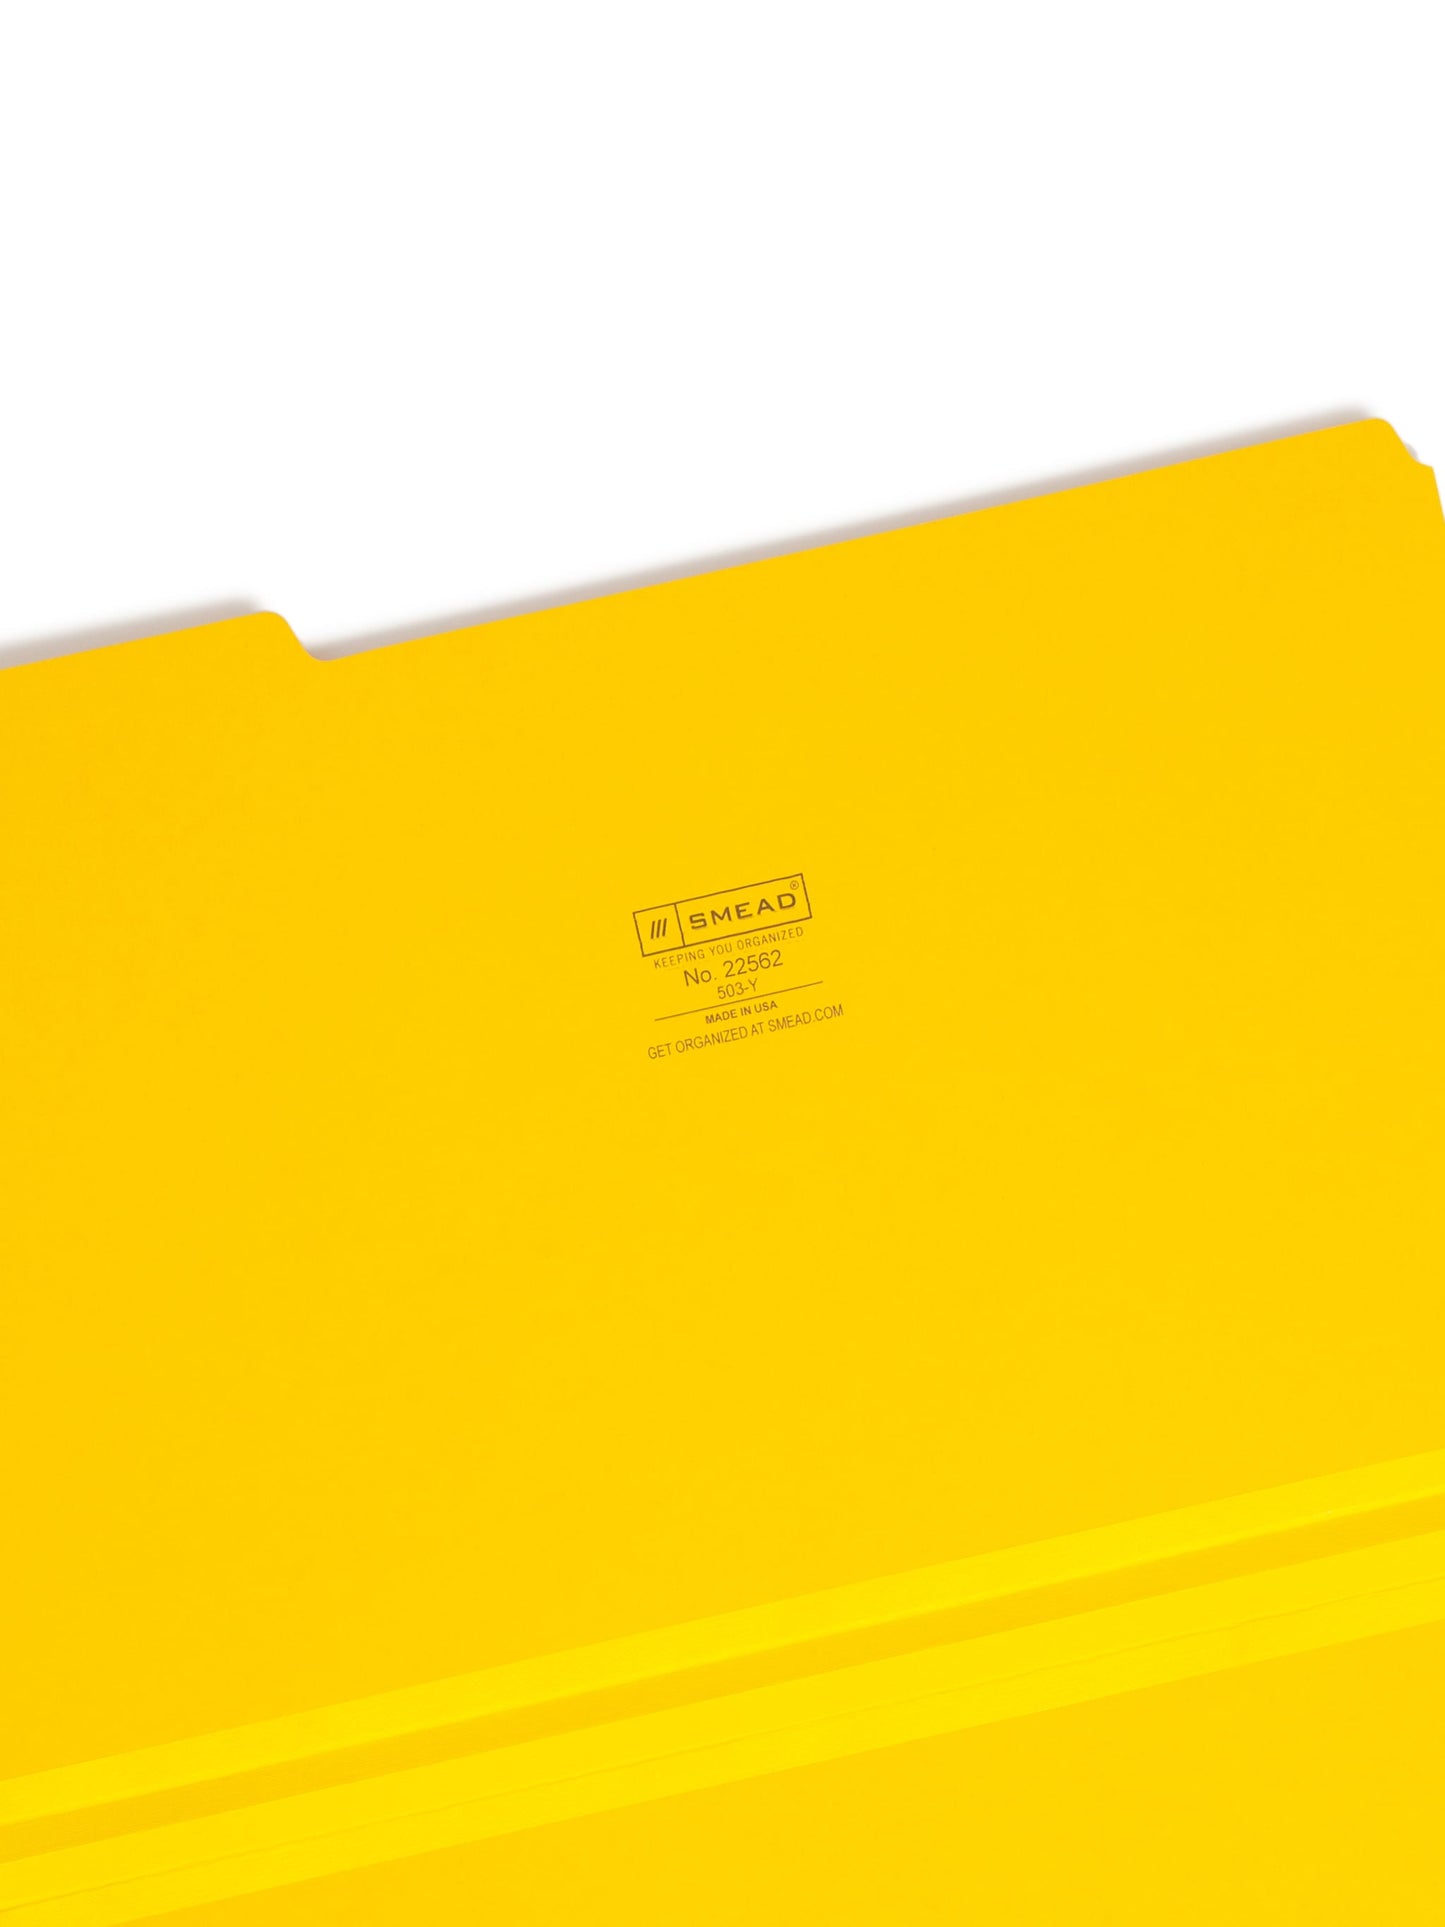 Pressboard File Folder, 1 inch Expansion, 1/3-Cut Tab, Yellow Color, Legal Size, Set of 25, 086486225625